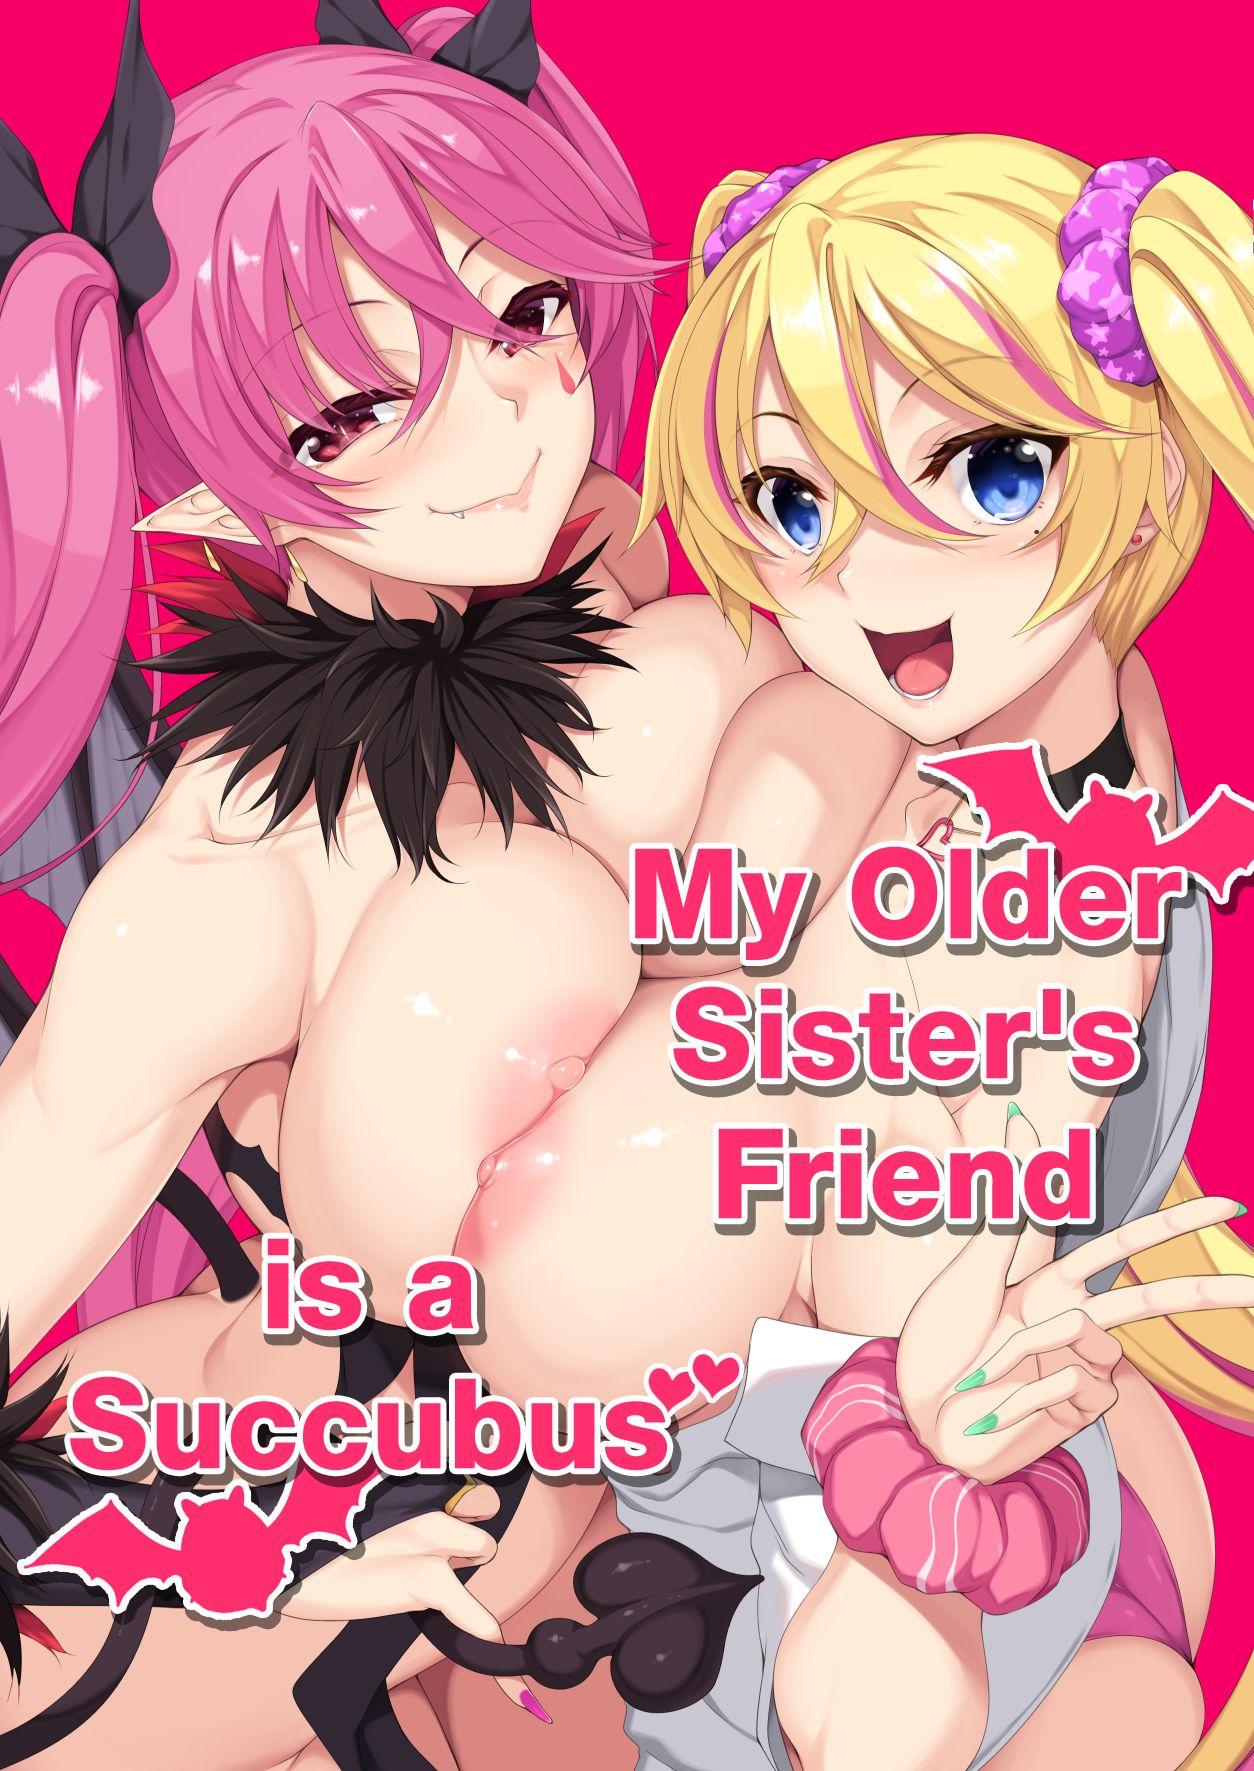 Pinay Onee-chan no Tomodachi ga Succubus de | My Older Sister's Friend is a Succubus - Original With - Picture 1